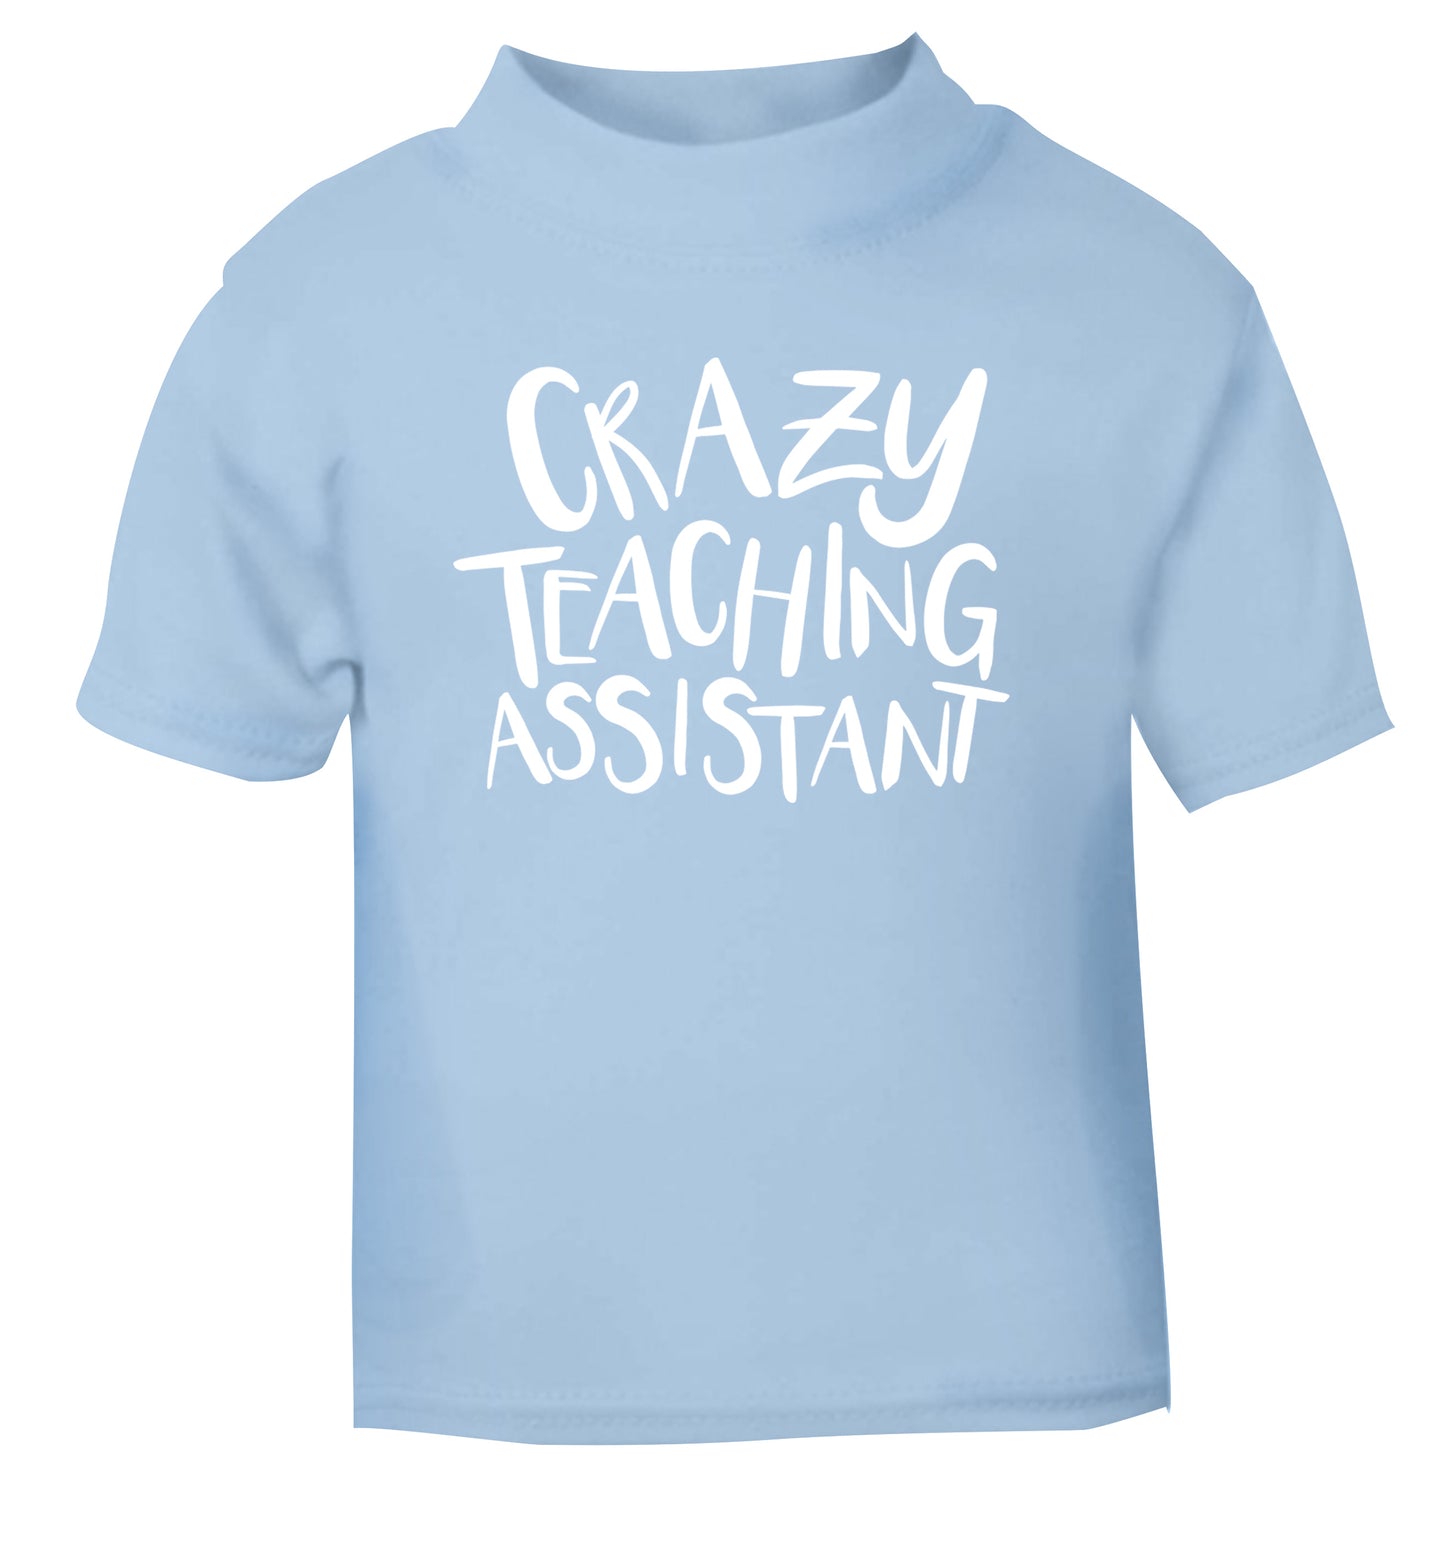 Crazy Teaching Assistant light blue Baby Toddler Tshirt 2 Years